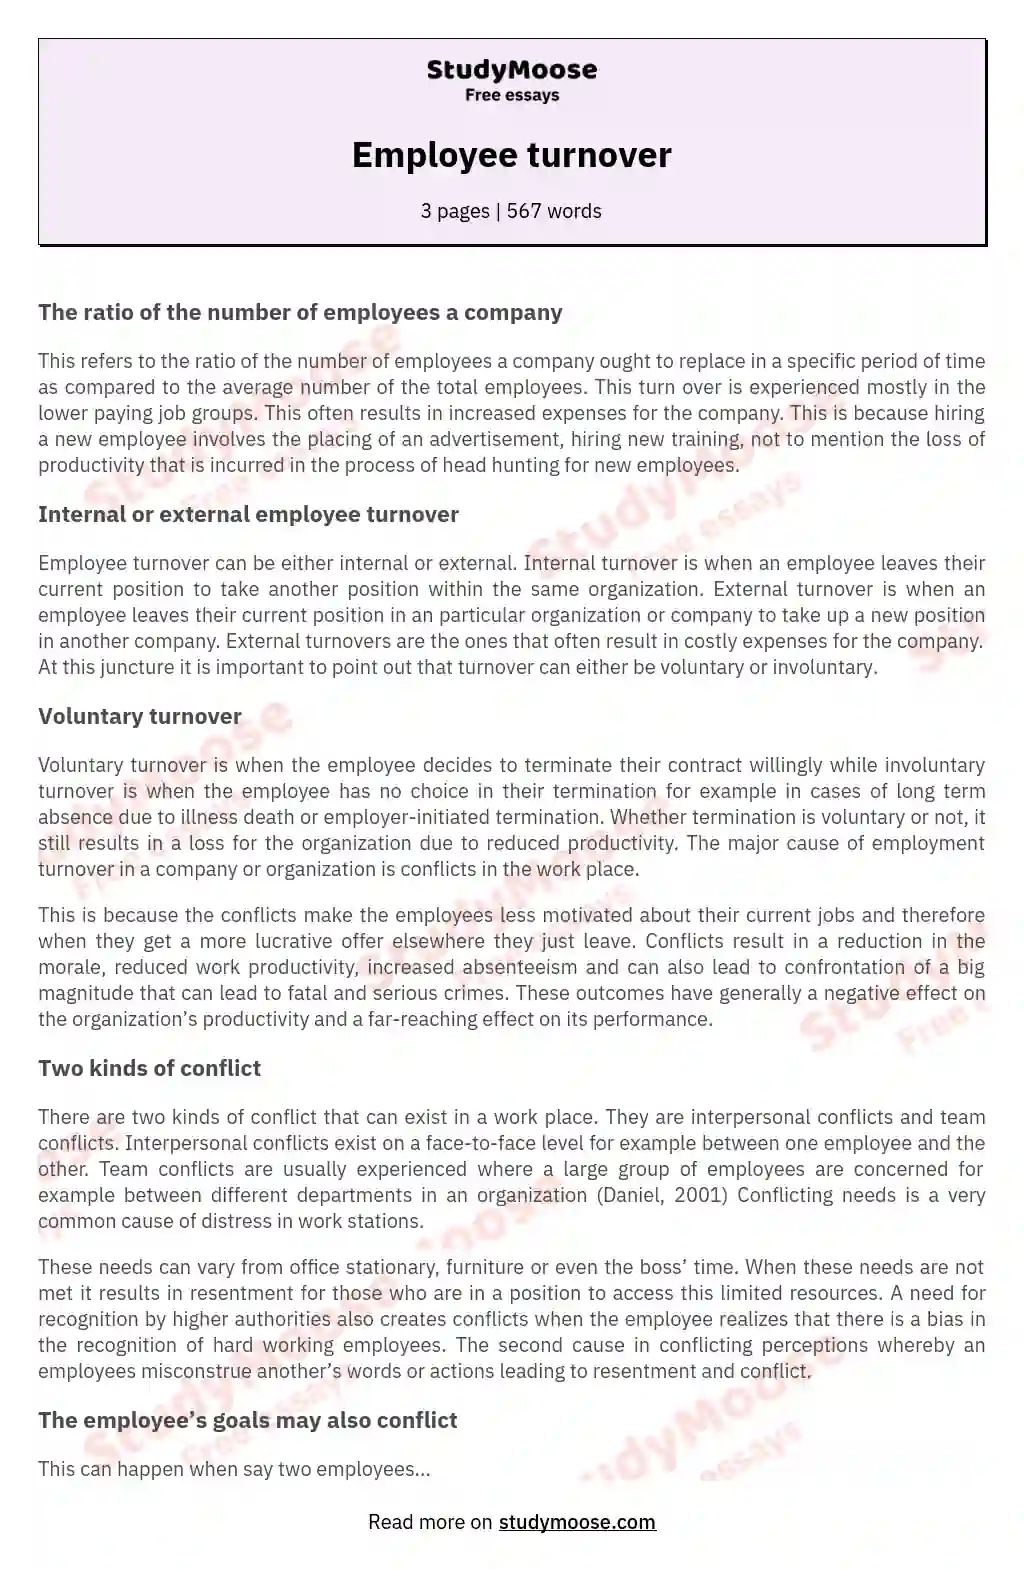 literature review on employee turnover management essay